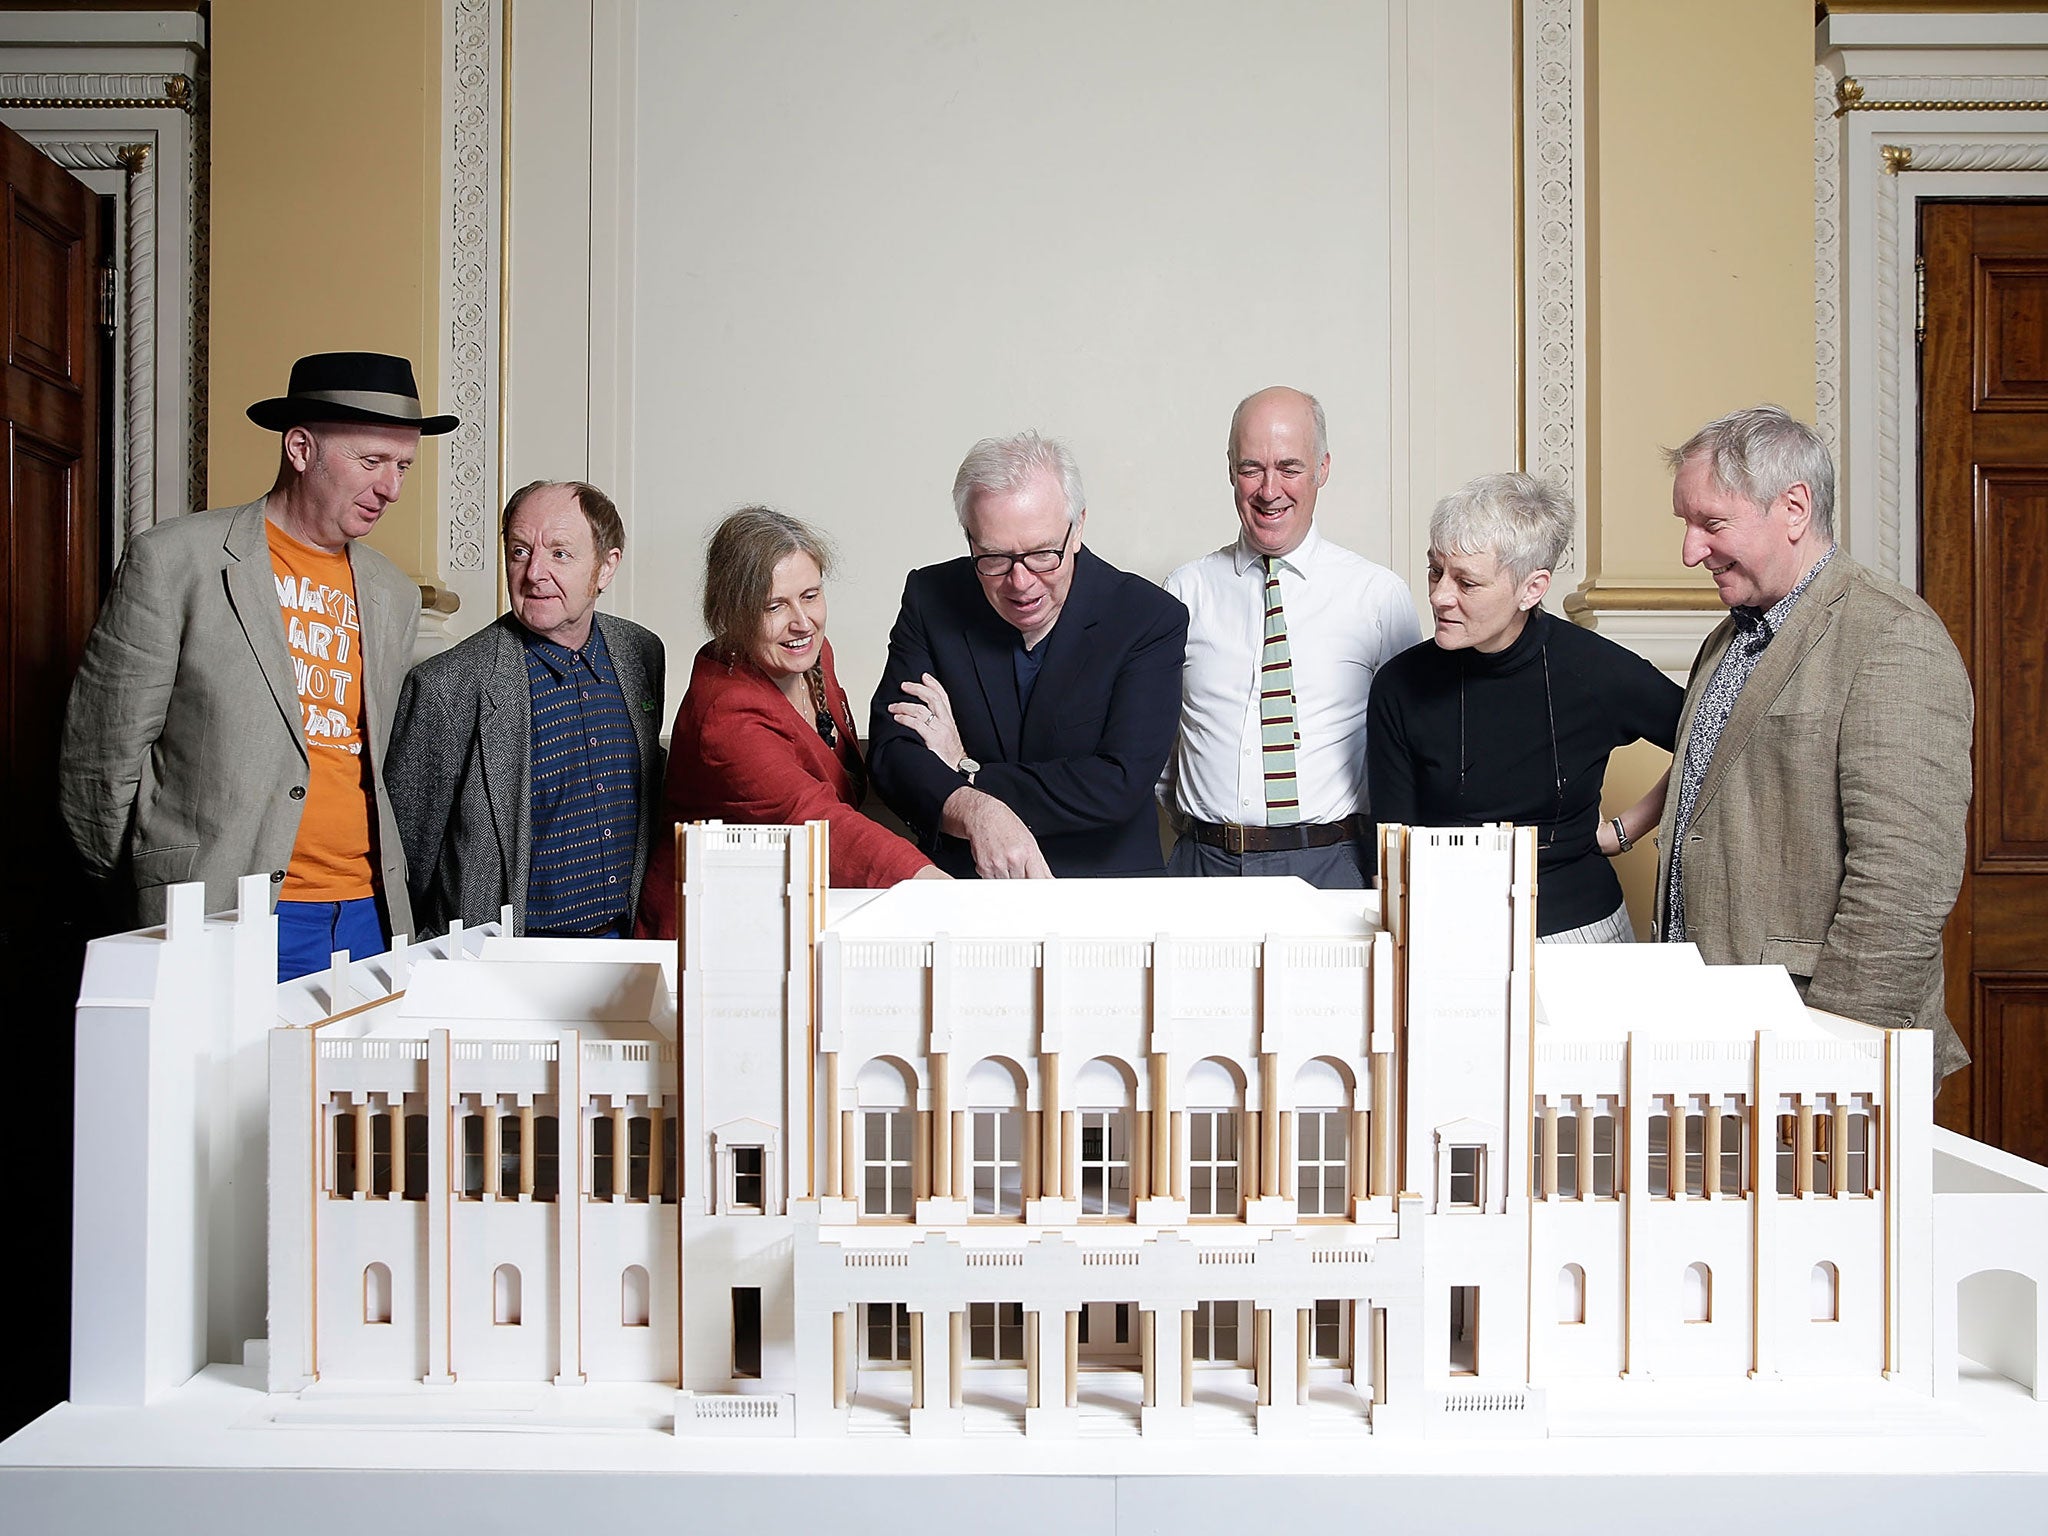 Sir David Chipperfield, centre, flanked by Charles Saumarez-Smith, shows off the plans for the Royal Academy’s £50m extension, scheduled to be completed in 2018